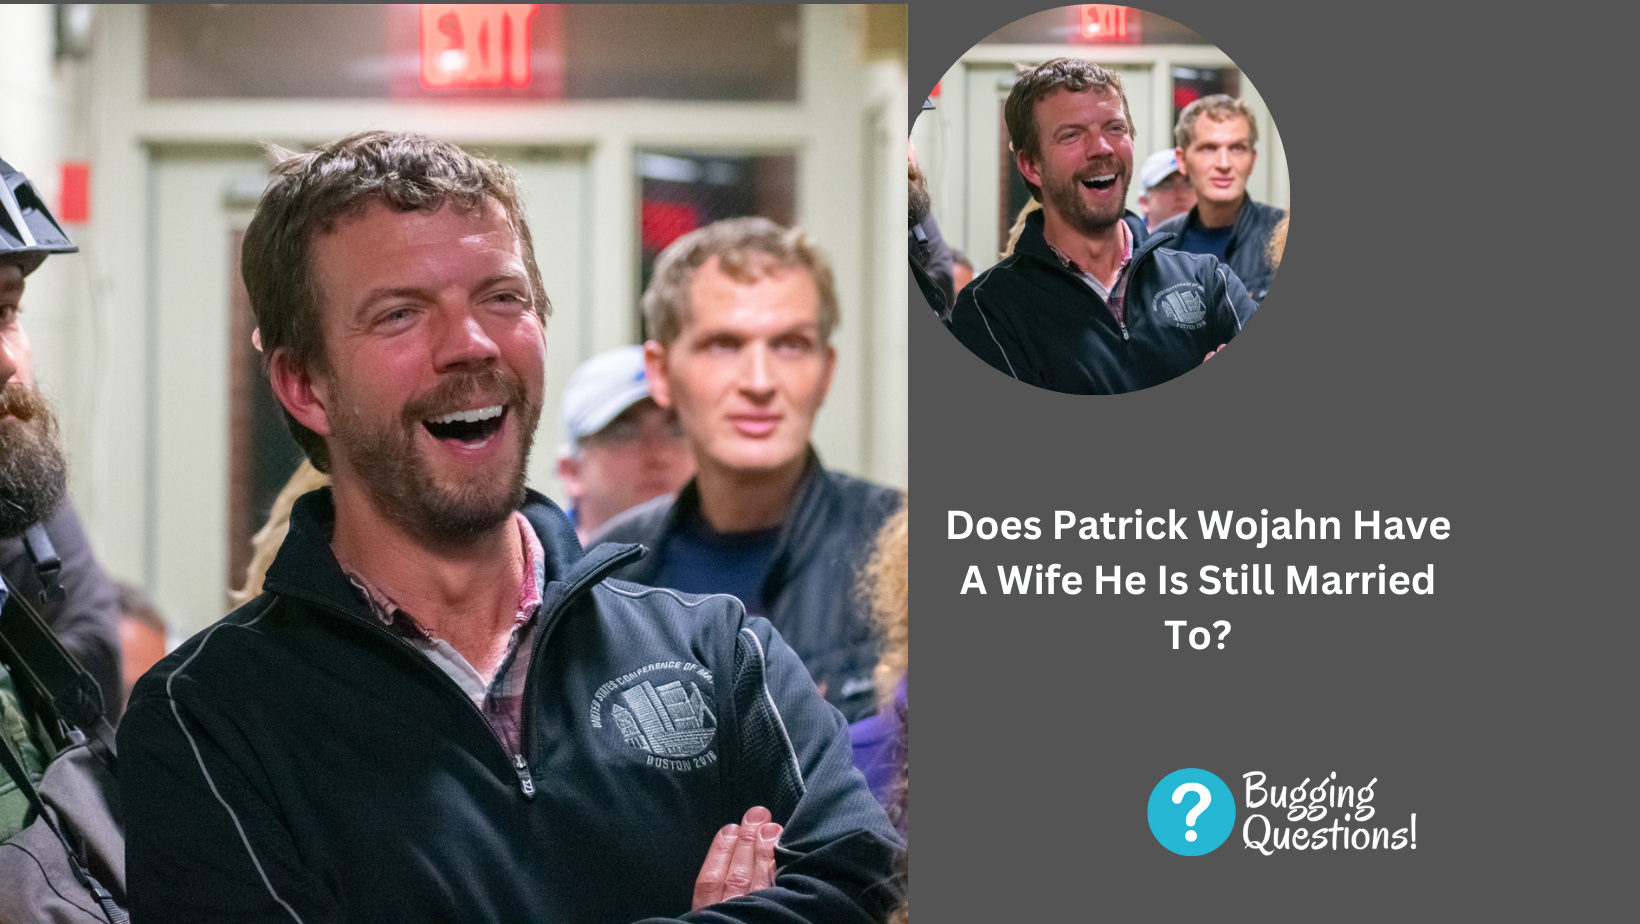 Does Patrick Wojahn Have A Wife He Is Still Married To?